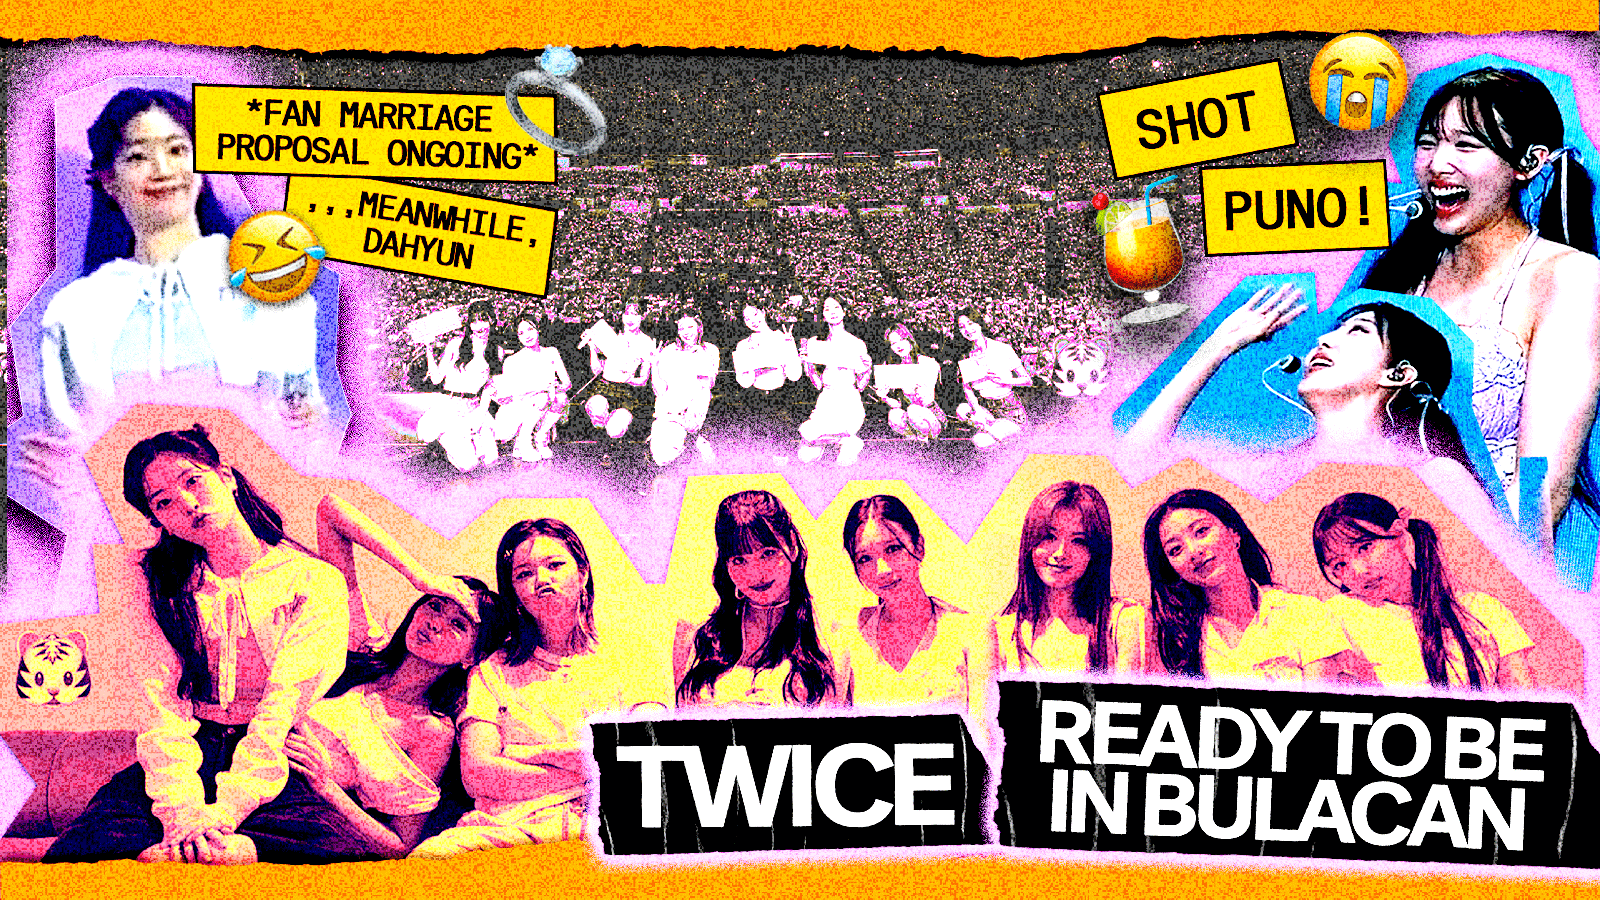 Get To Know TWICE Members - Philippine Concerts